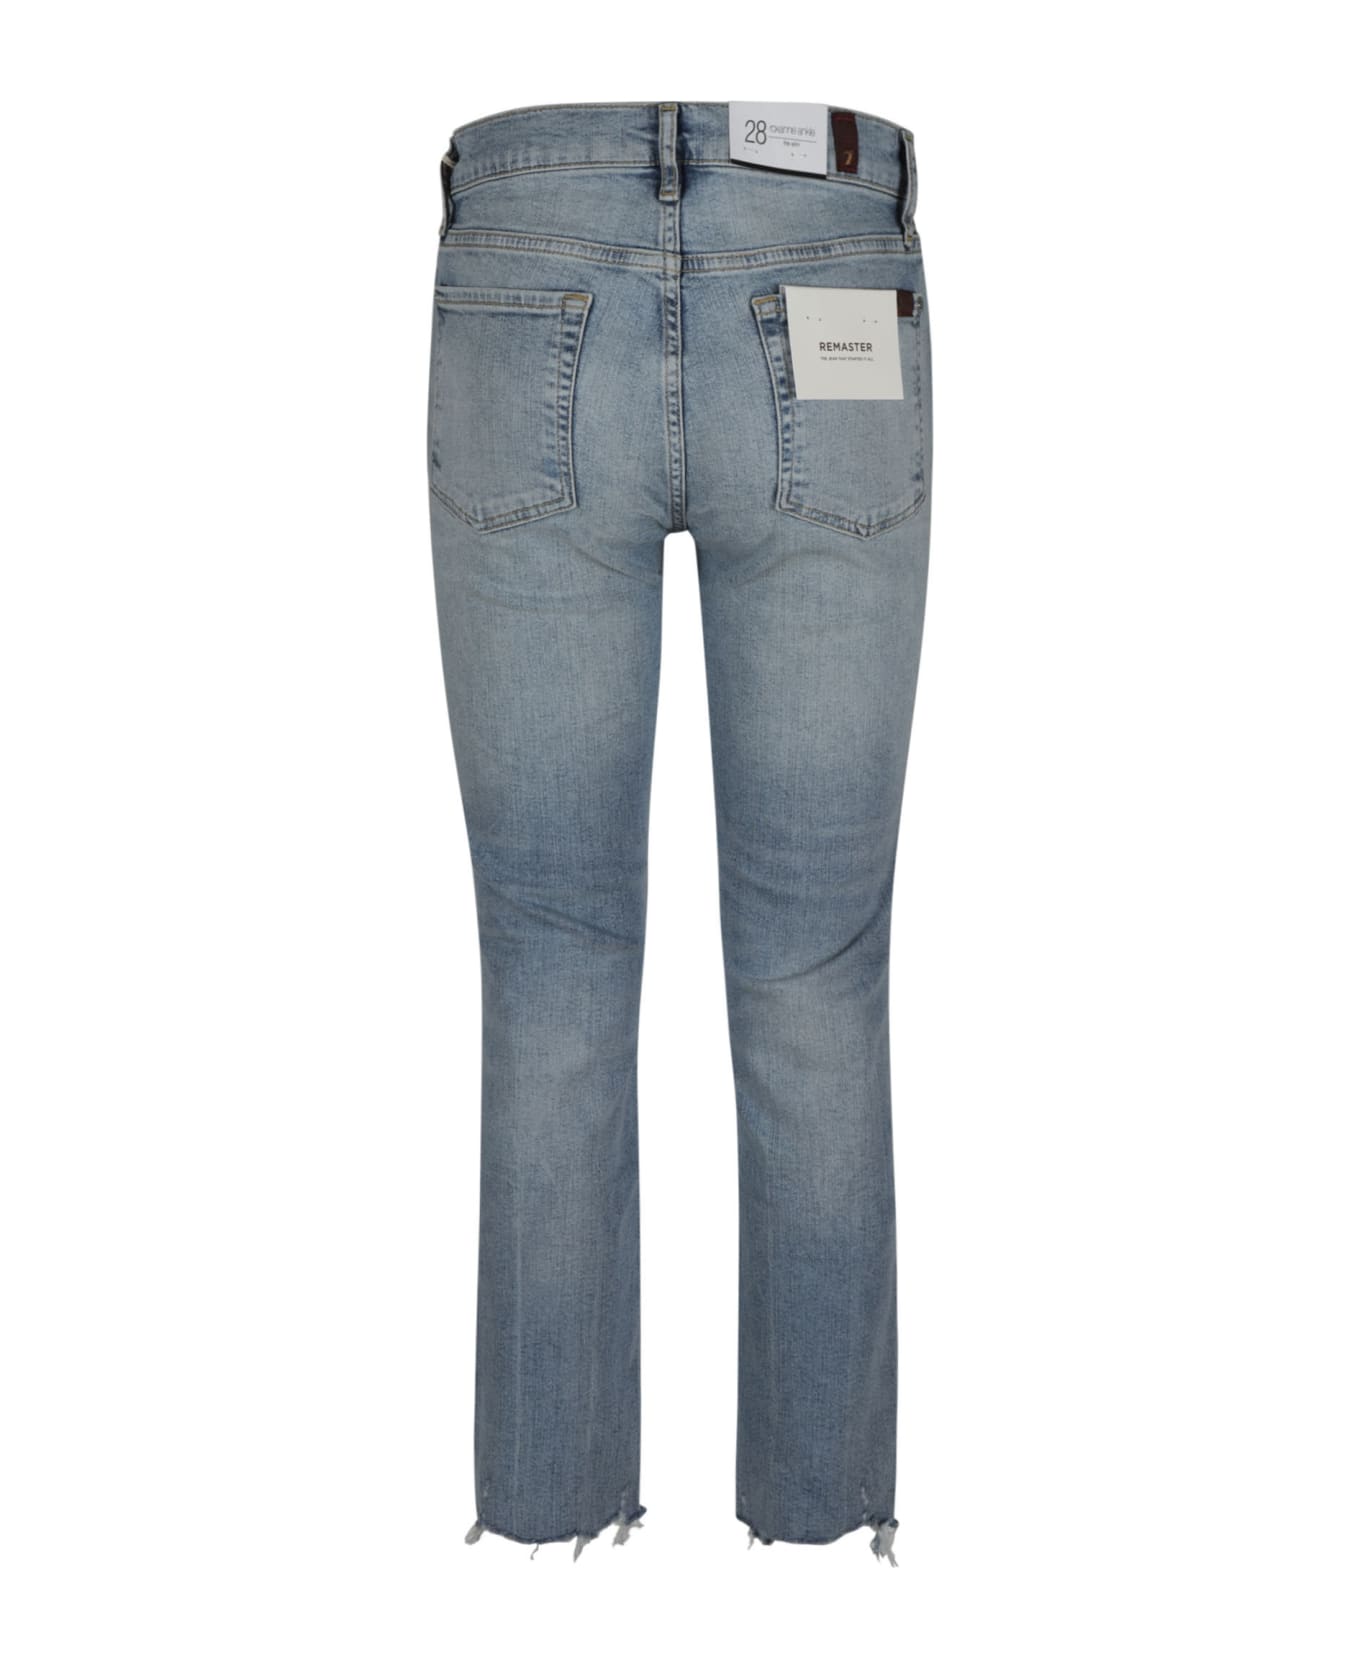 7 For All Mankind Roxanne Ankle Jeans - Blue Denim デニム